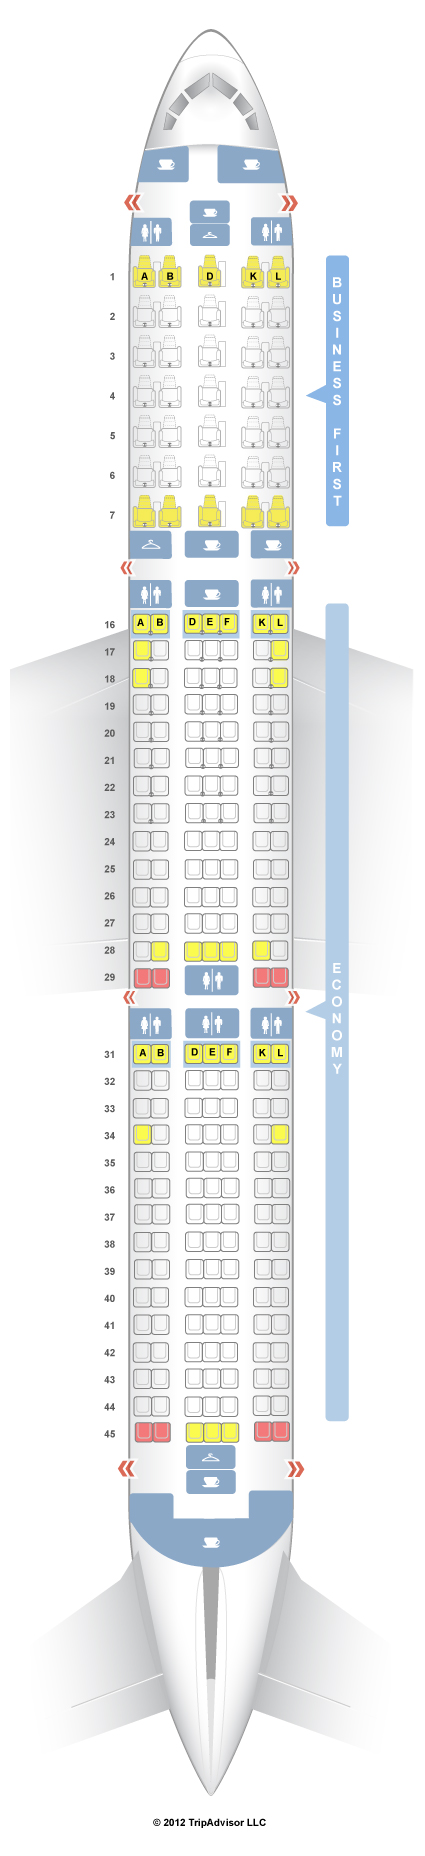 united airlines seat belt length